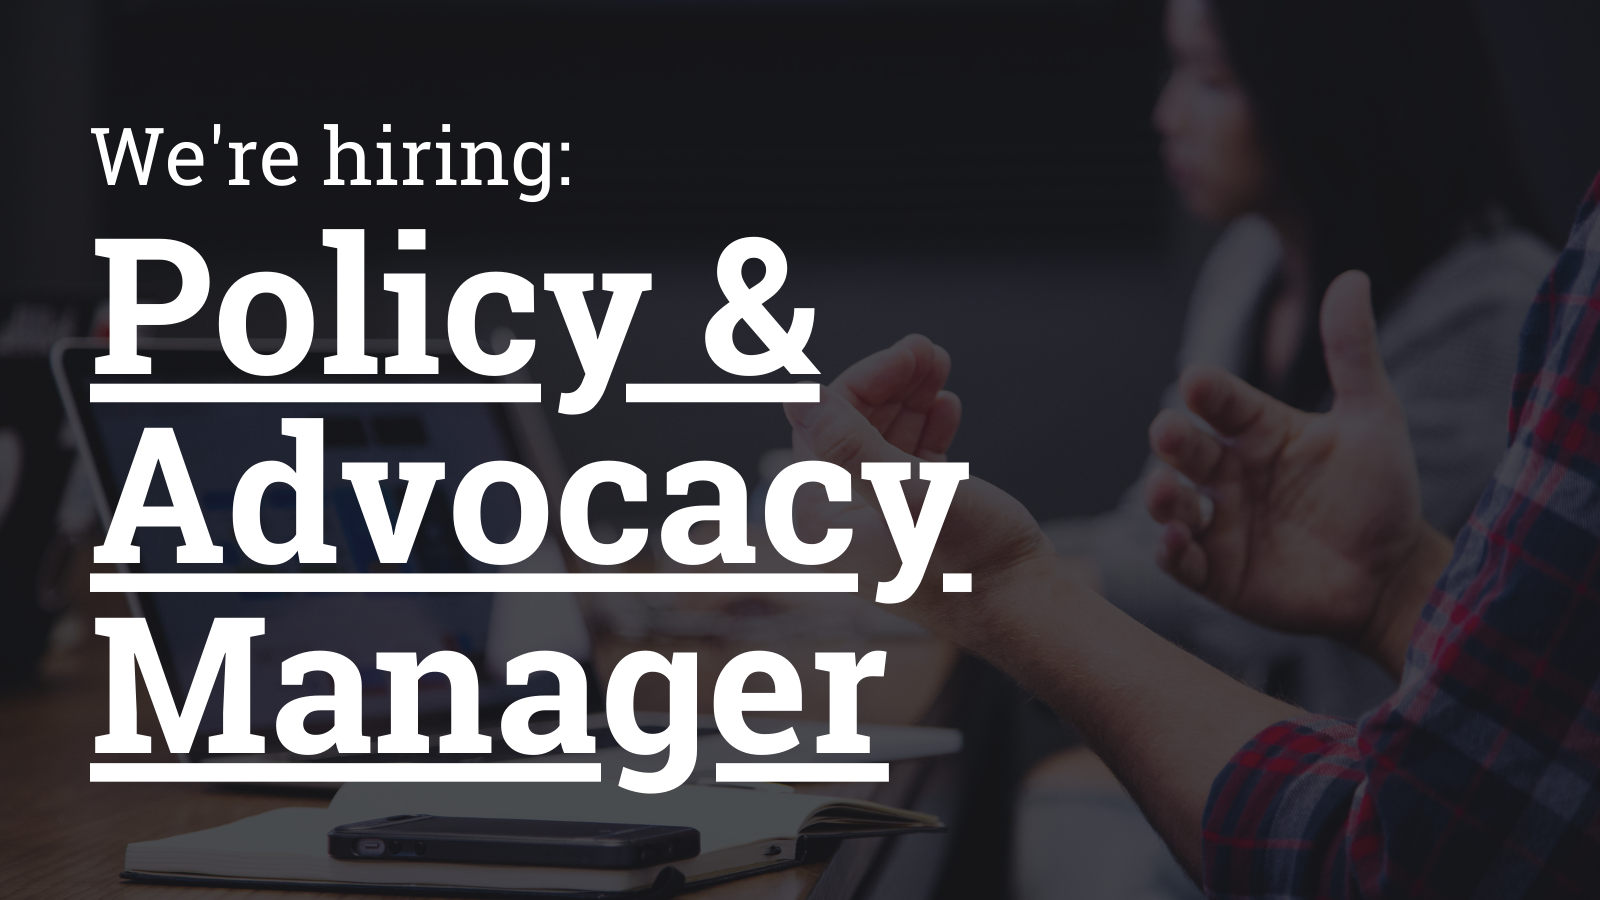 We're hiring: Policy and Advocacy Manager.